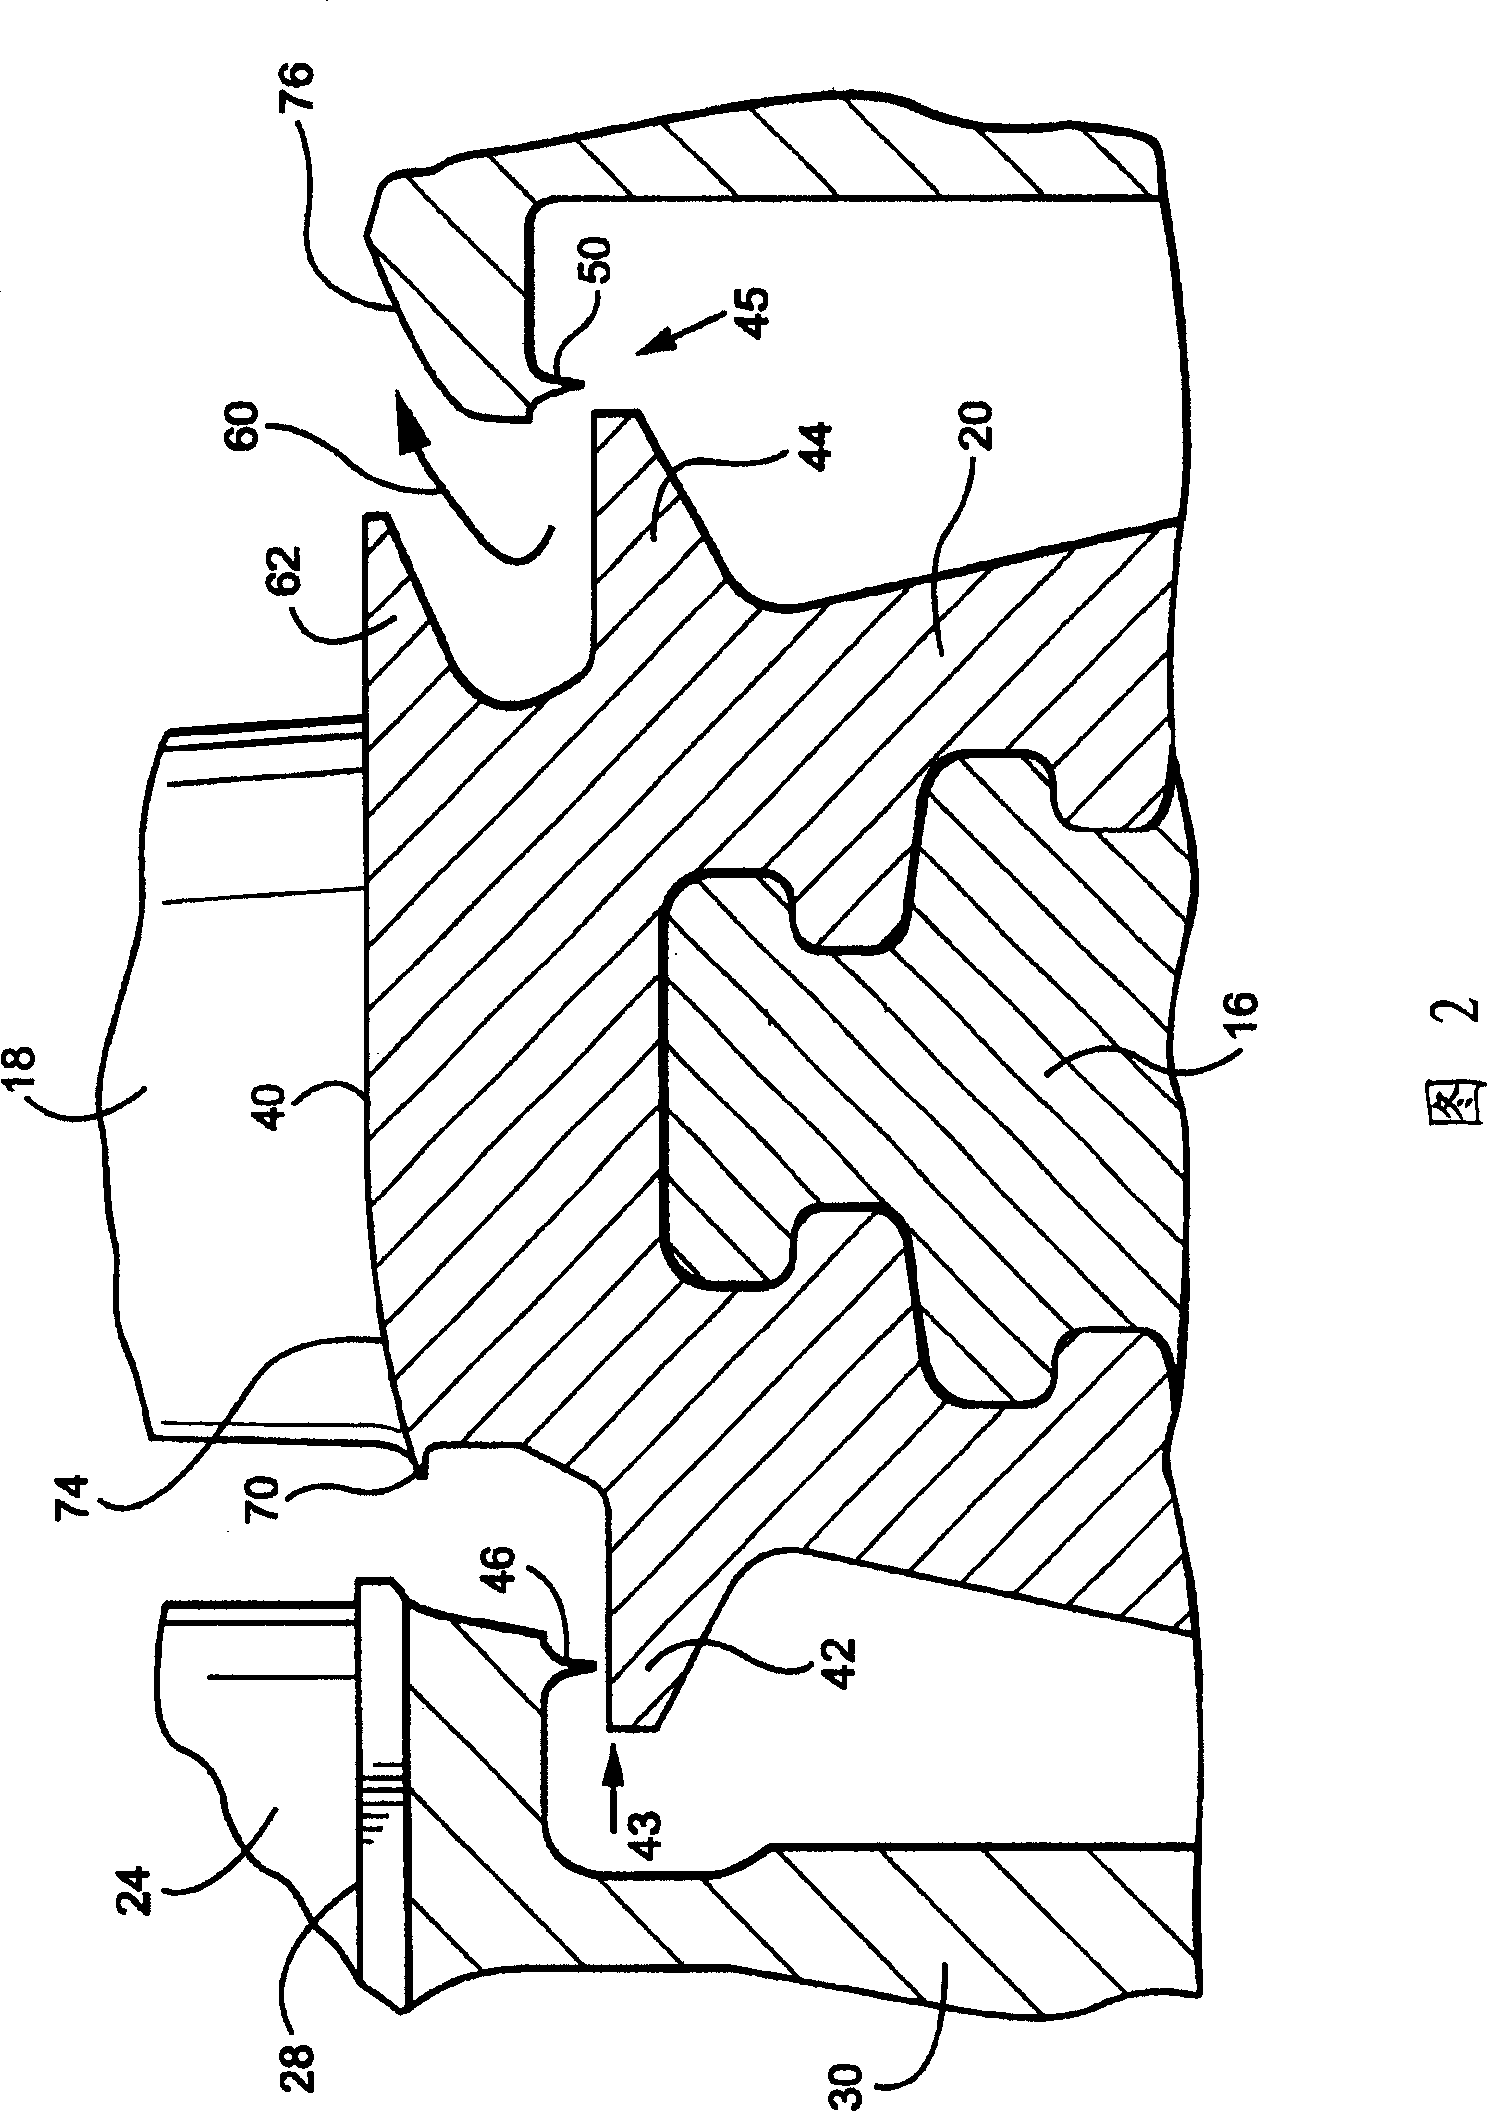 Flow passage sealing of turbine and streamline structure thereof